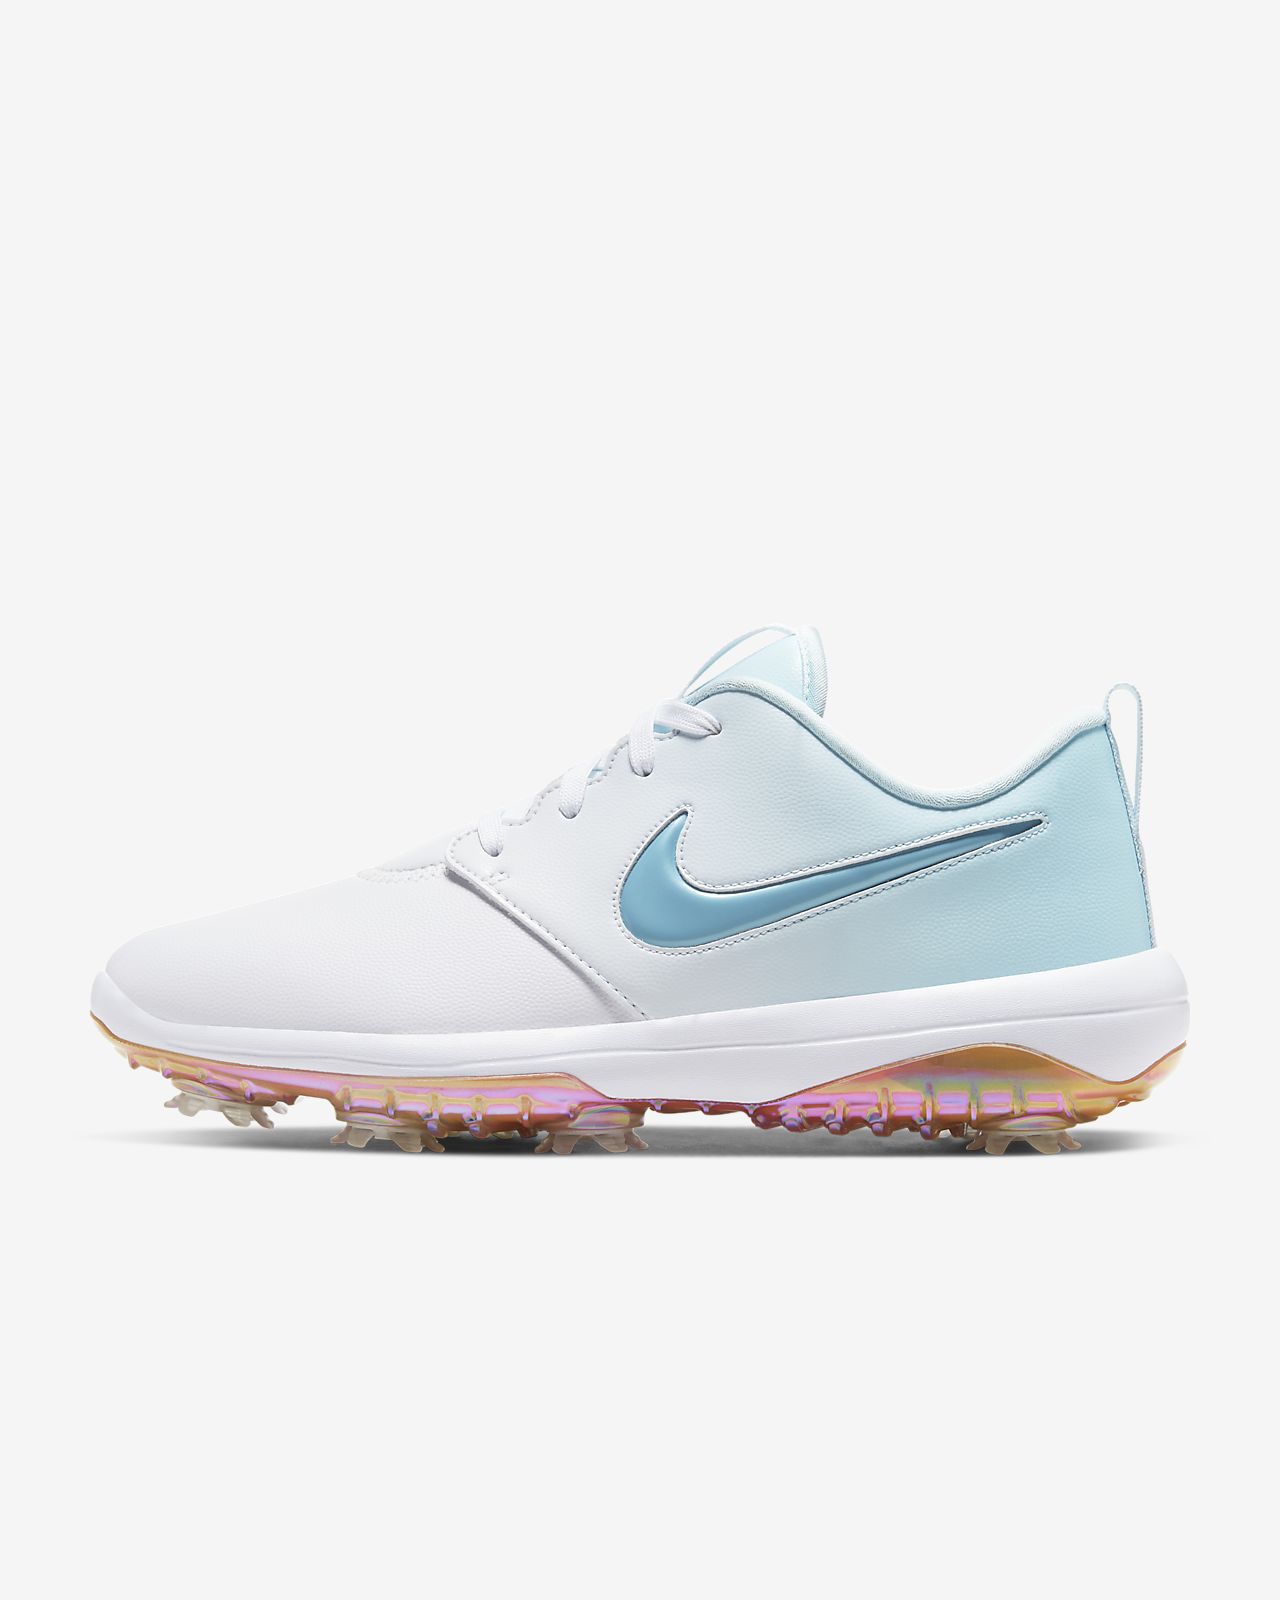 nike women's limited edition roshe g tour nrg golf shoes